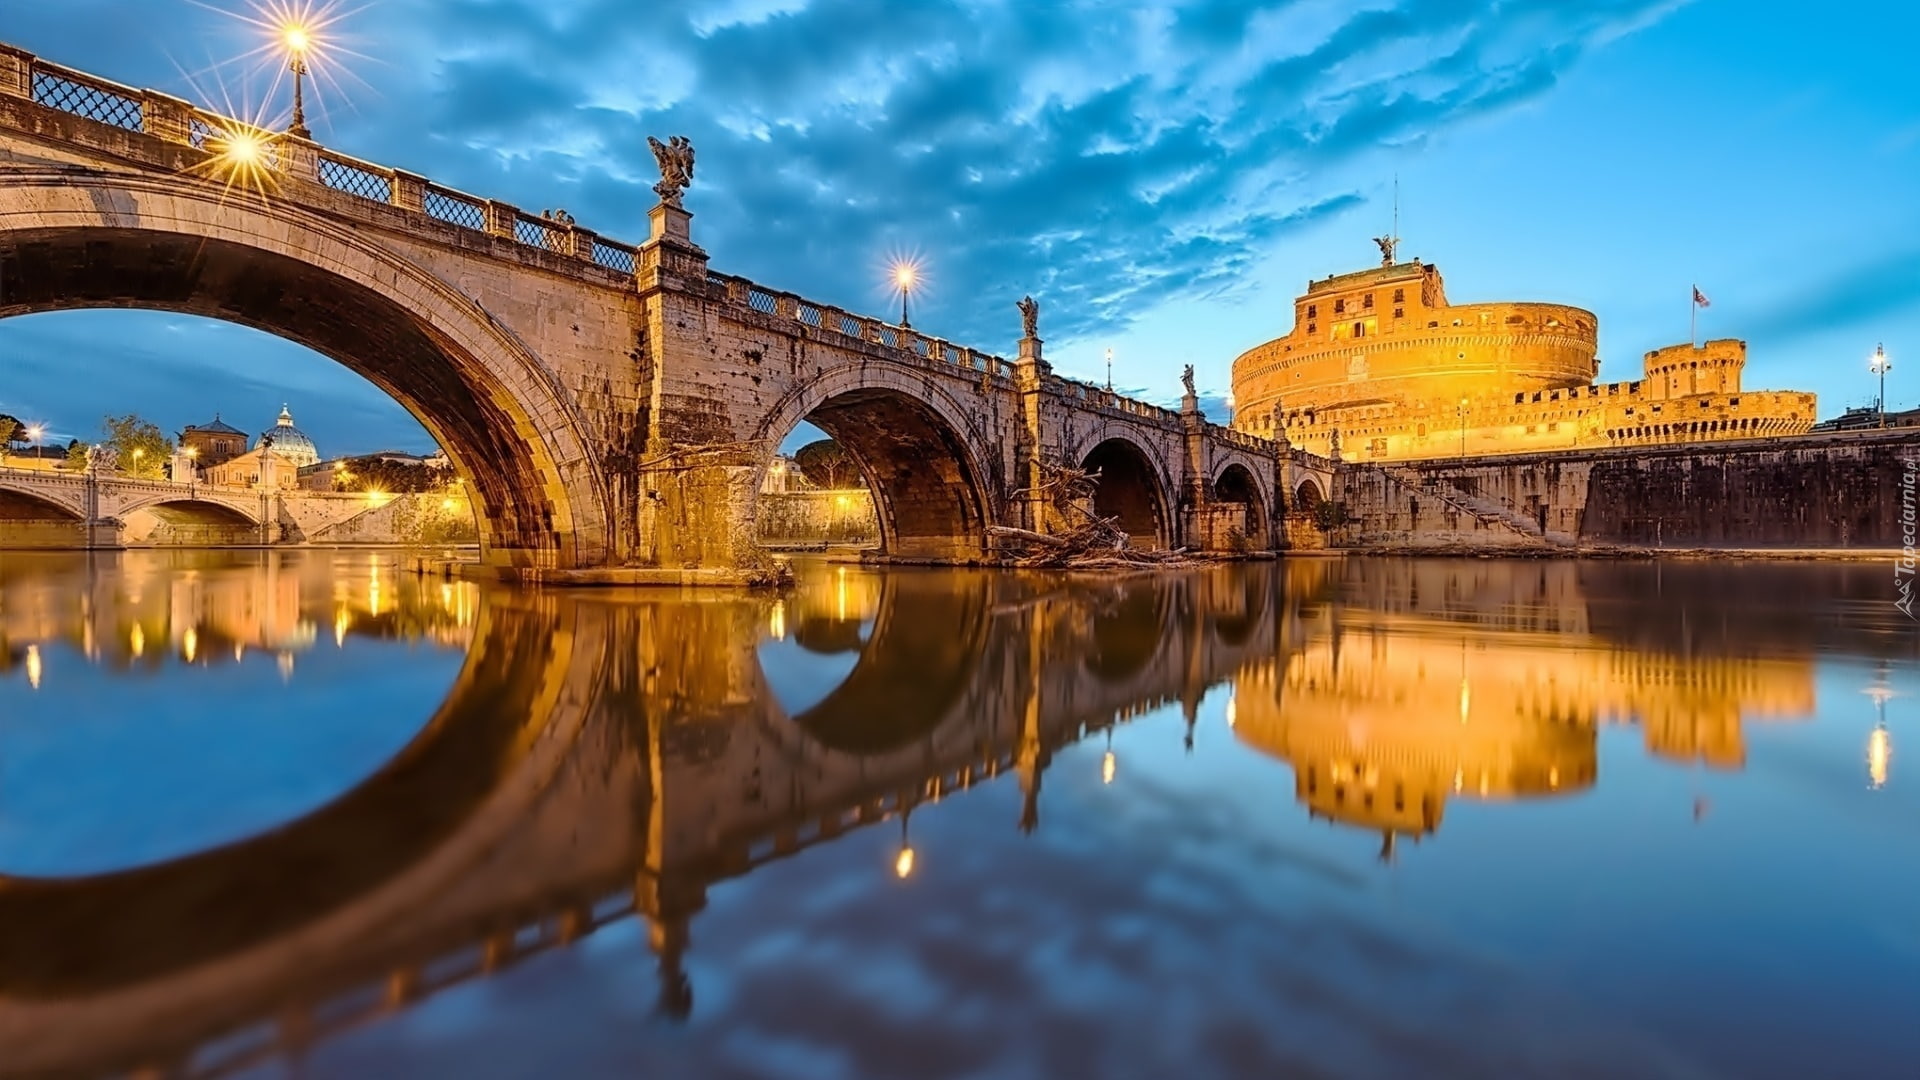 Rome Italy Ponte Sant Angelo Bridge Tiber River Castle San Angelo Reflection Hd Wallpapers For Mobile Phones Tablet And Laptop 1920×1080